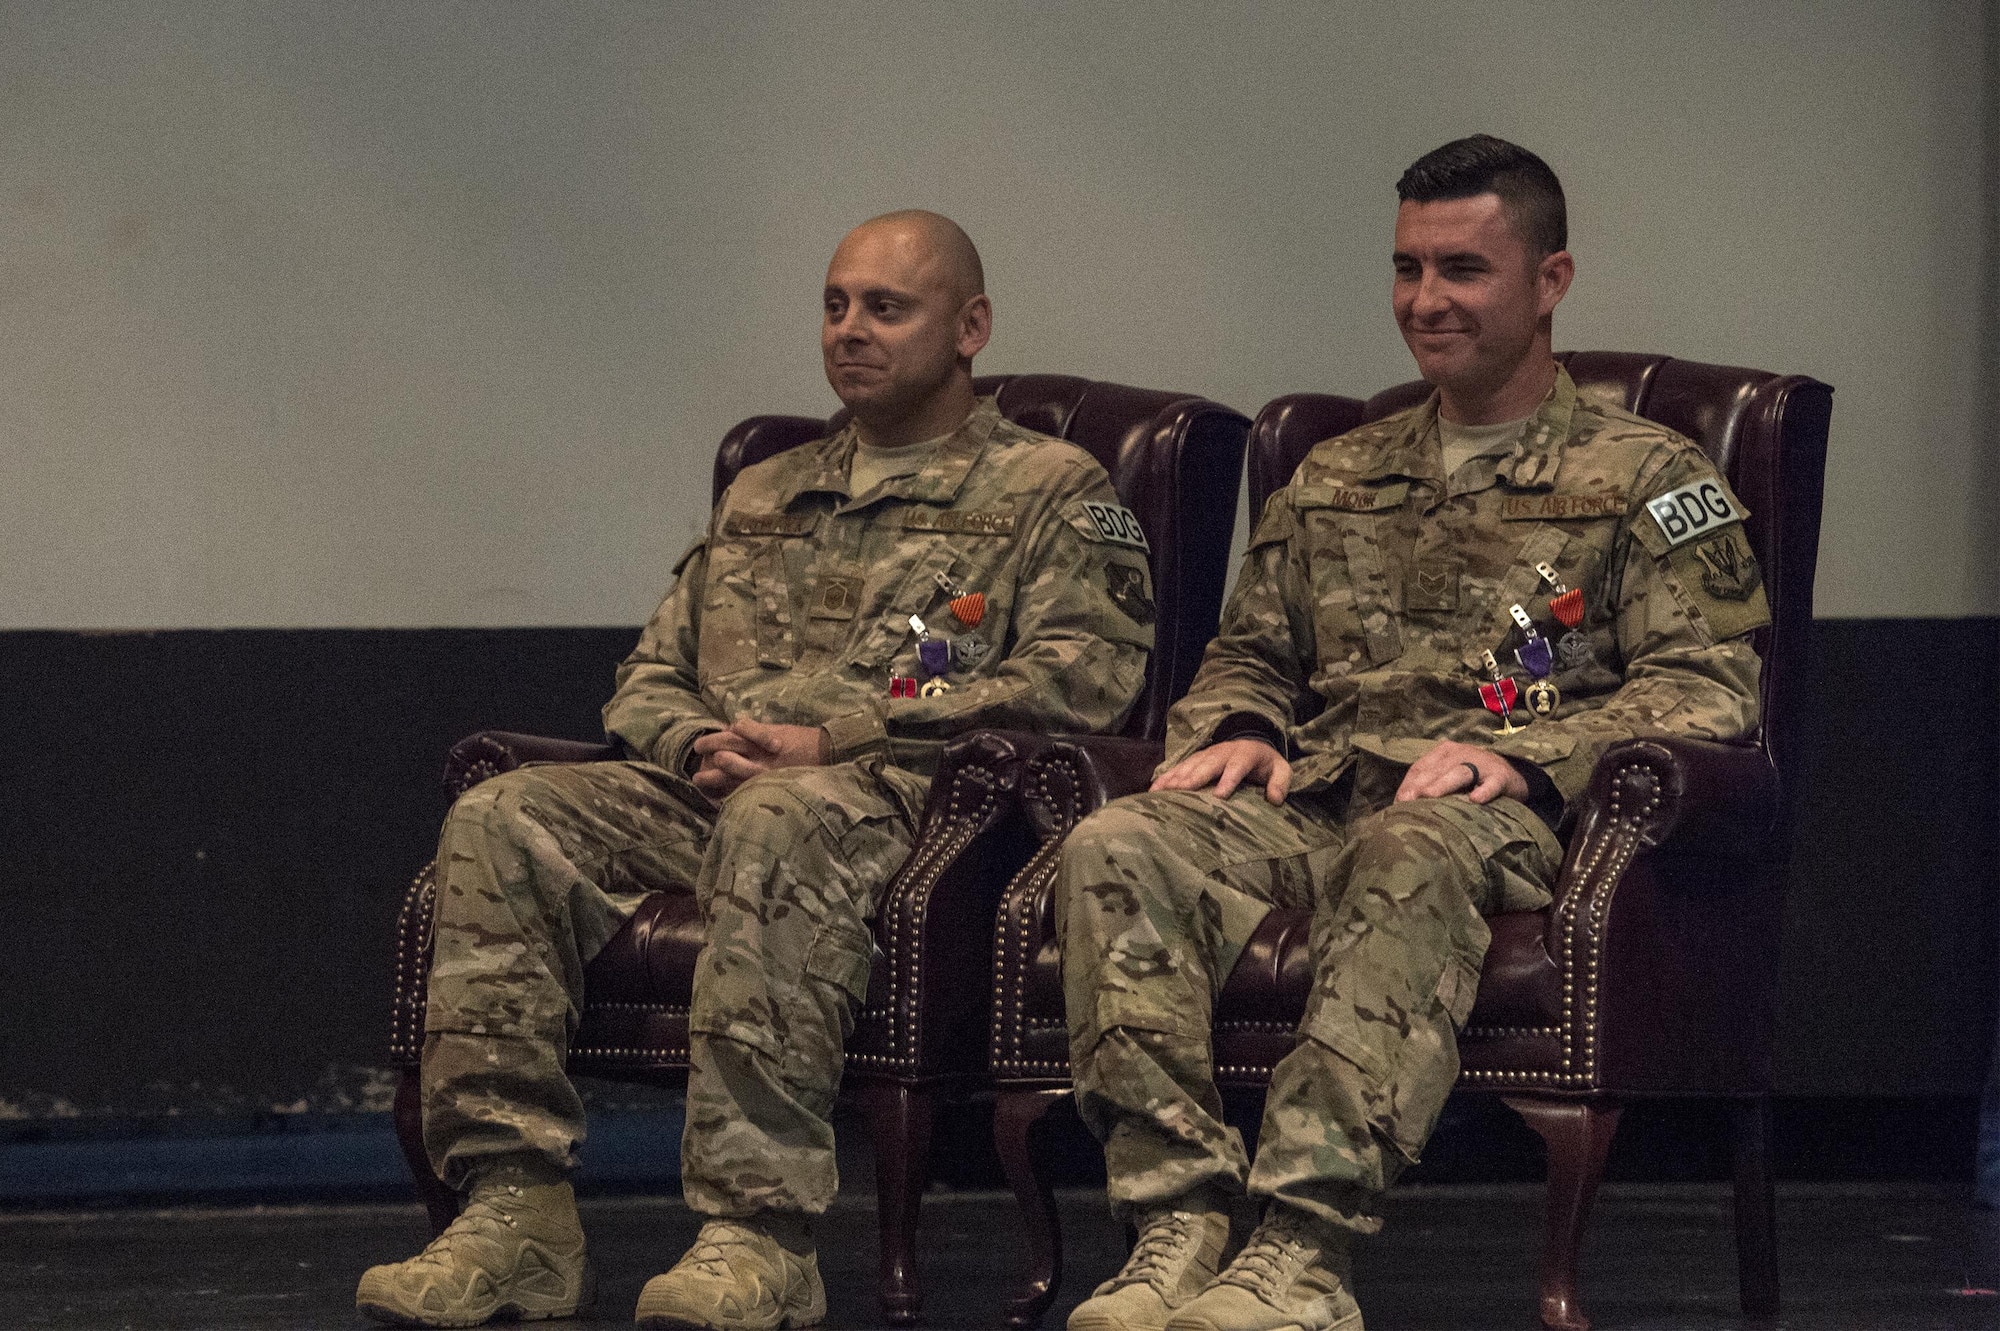 U.S. Air Force Master Sgt. Aaron Frederick, left, 93d Air Ground Operations Wing command chief executive assistant, and Staff Sgt. Bradley Mock 824 Base Defense Squadron superintendent of supply listen to remarks during a medallion ceremony, July 8, 2016, at Moody Air Force Base, Ga. Frederick and Mock disregarded their need for medical attention to ensure the well-being, safety, and evacuation of injured Airmen after an attack Dec. 21, 2015, in Southwest Asia. (U.S. Air Force photo by Airman 1st Class Janiqua P. Robinson/Released)